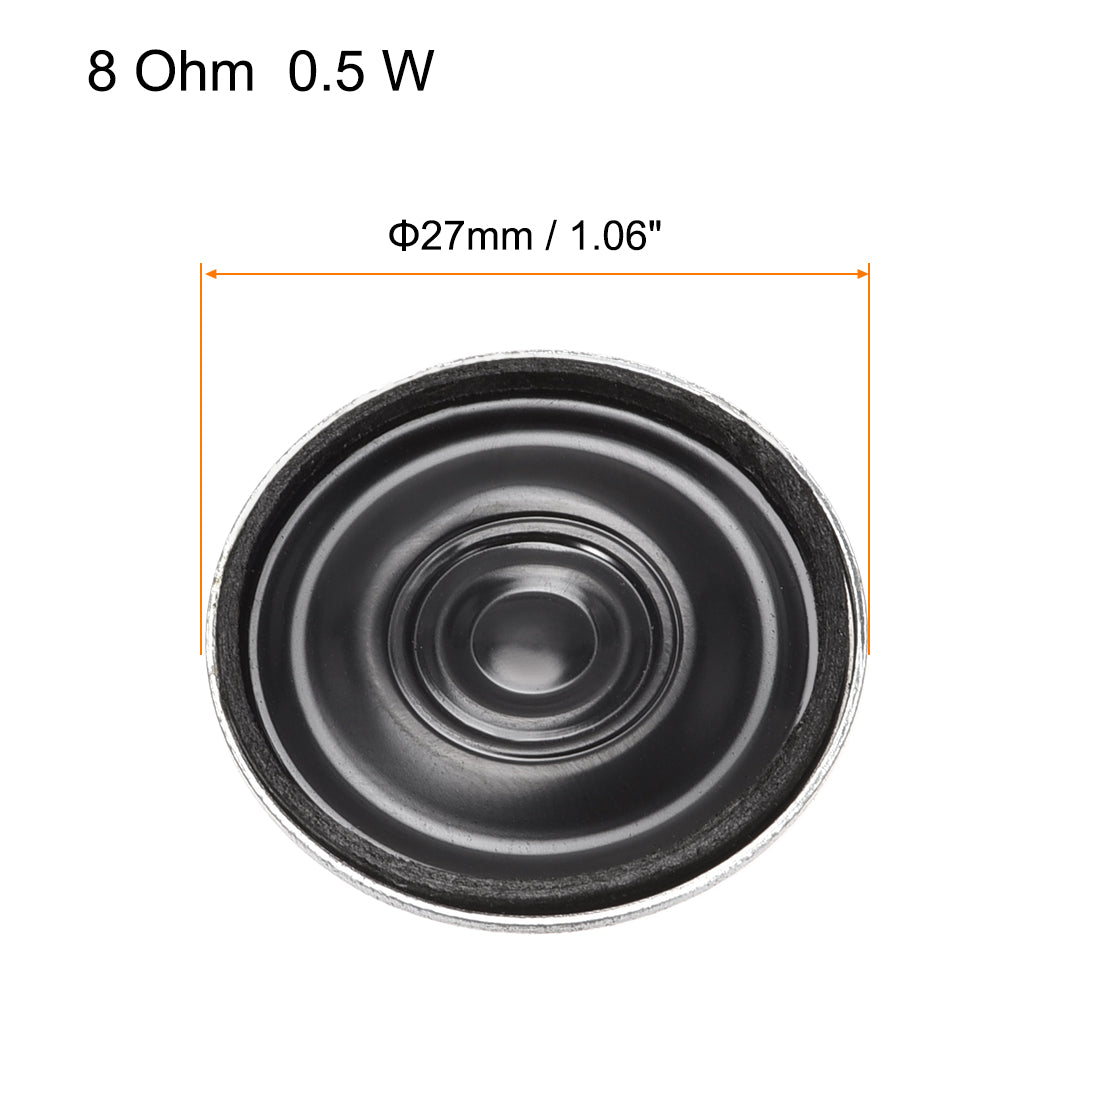 uxcell Uxcell 0.5W 8 Ohm DIY Magnetic Speaker 27mm Round Shape Replacement Loudspeaker for Building Intercom 8pcs